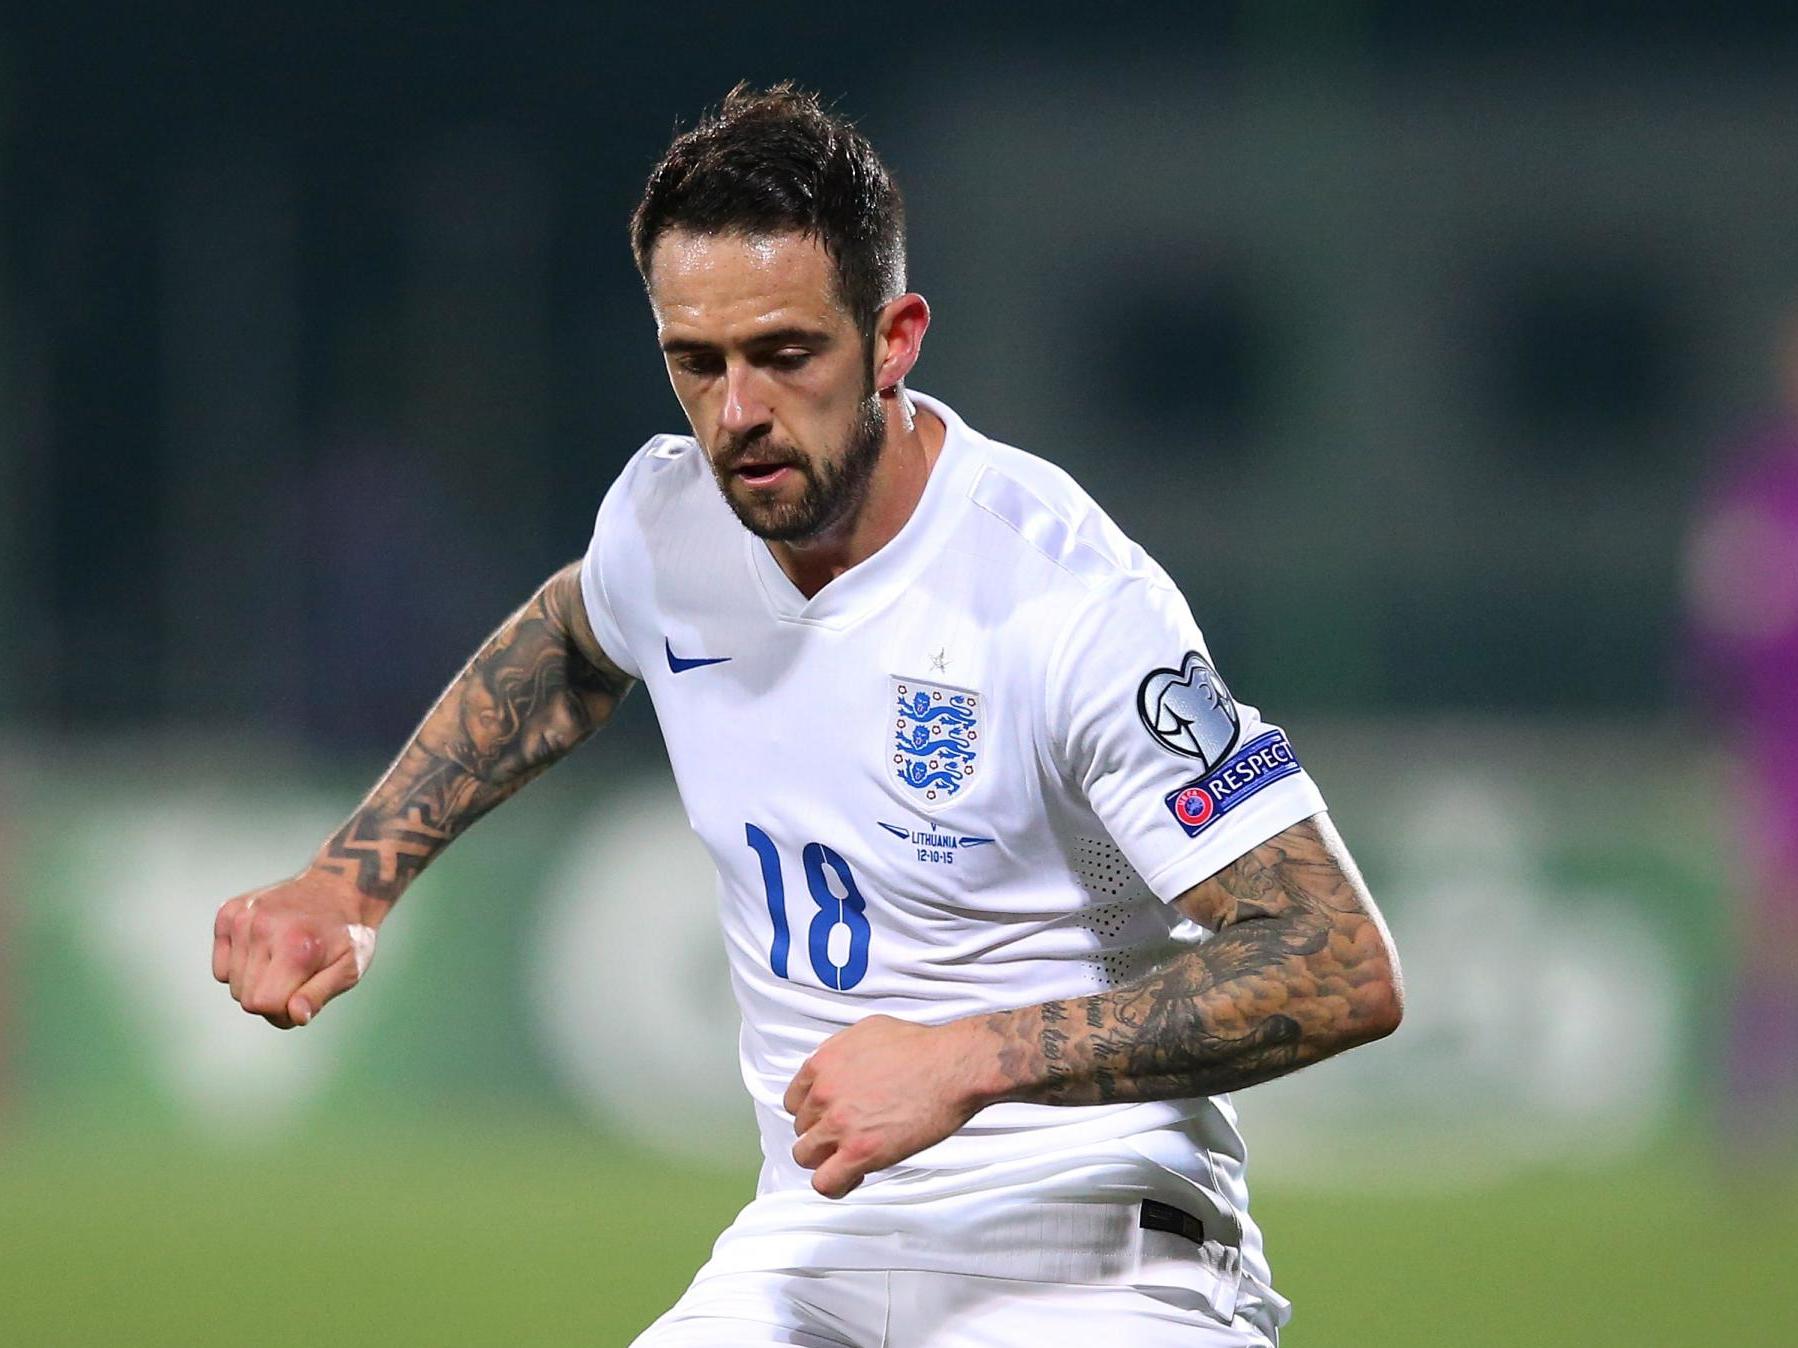 Ings made his Three Lions debut almost five years ago